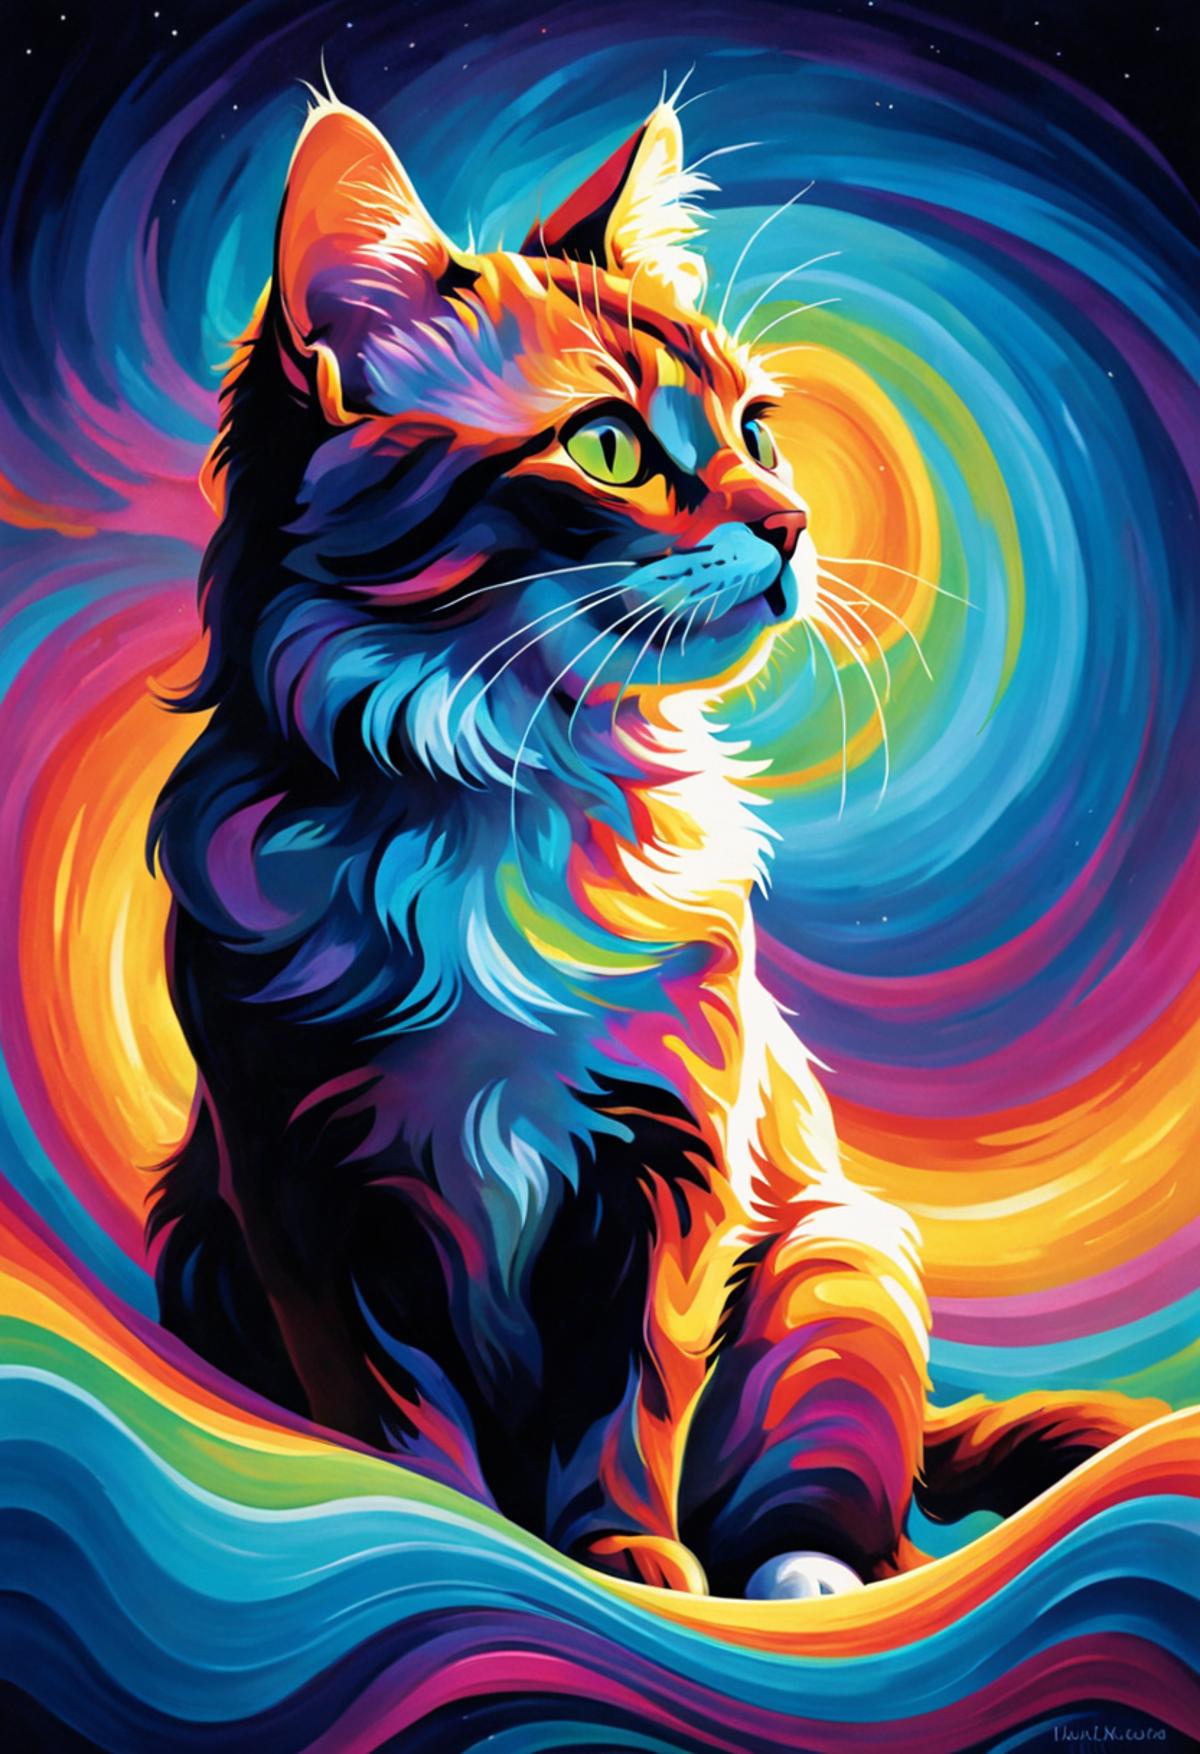 A vibrant and colorful cat with green eyes.